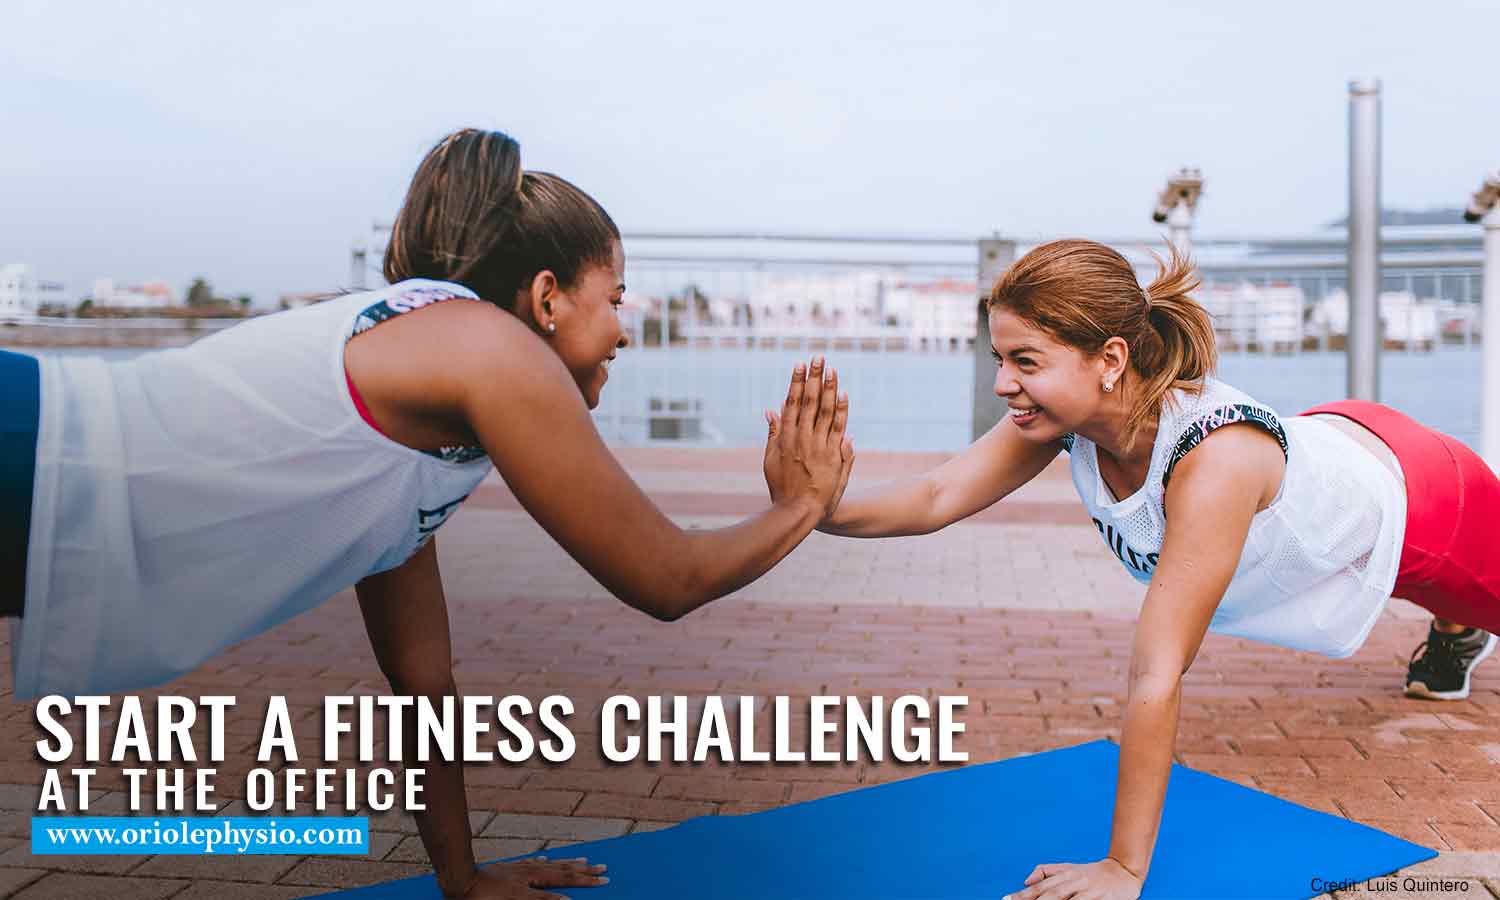 Start a fitness challenge at the office